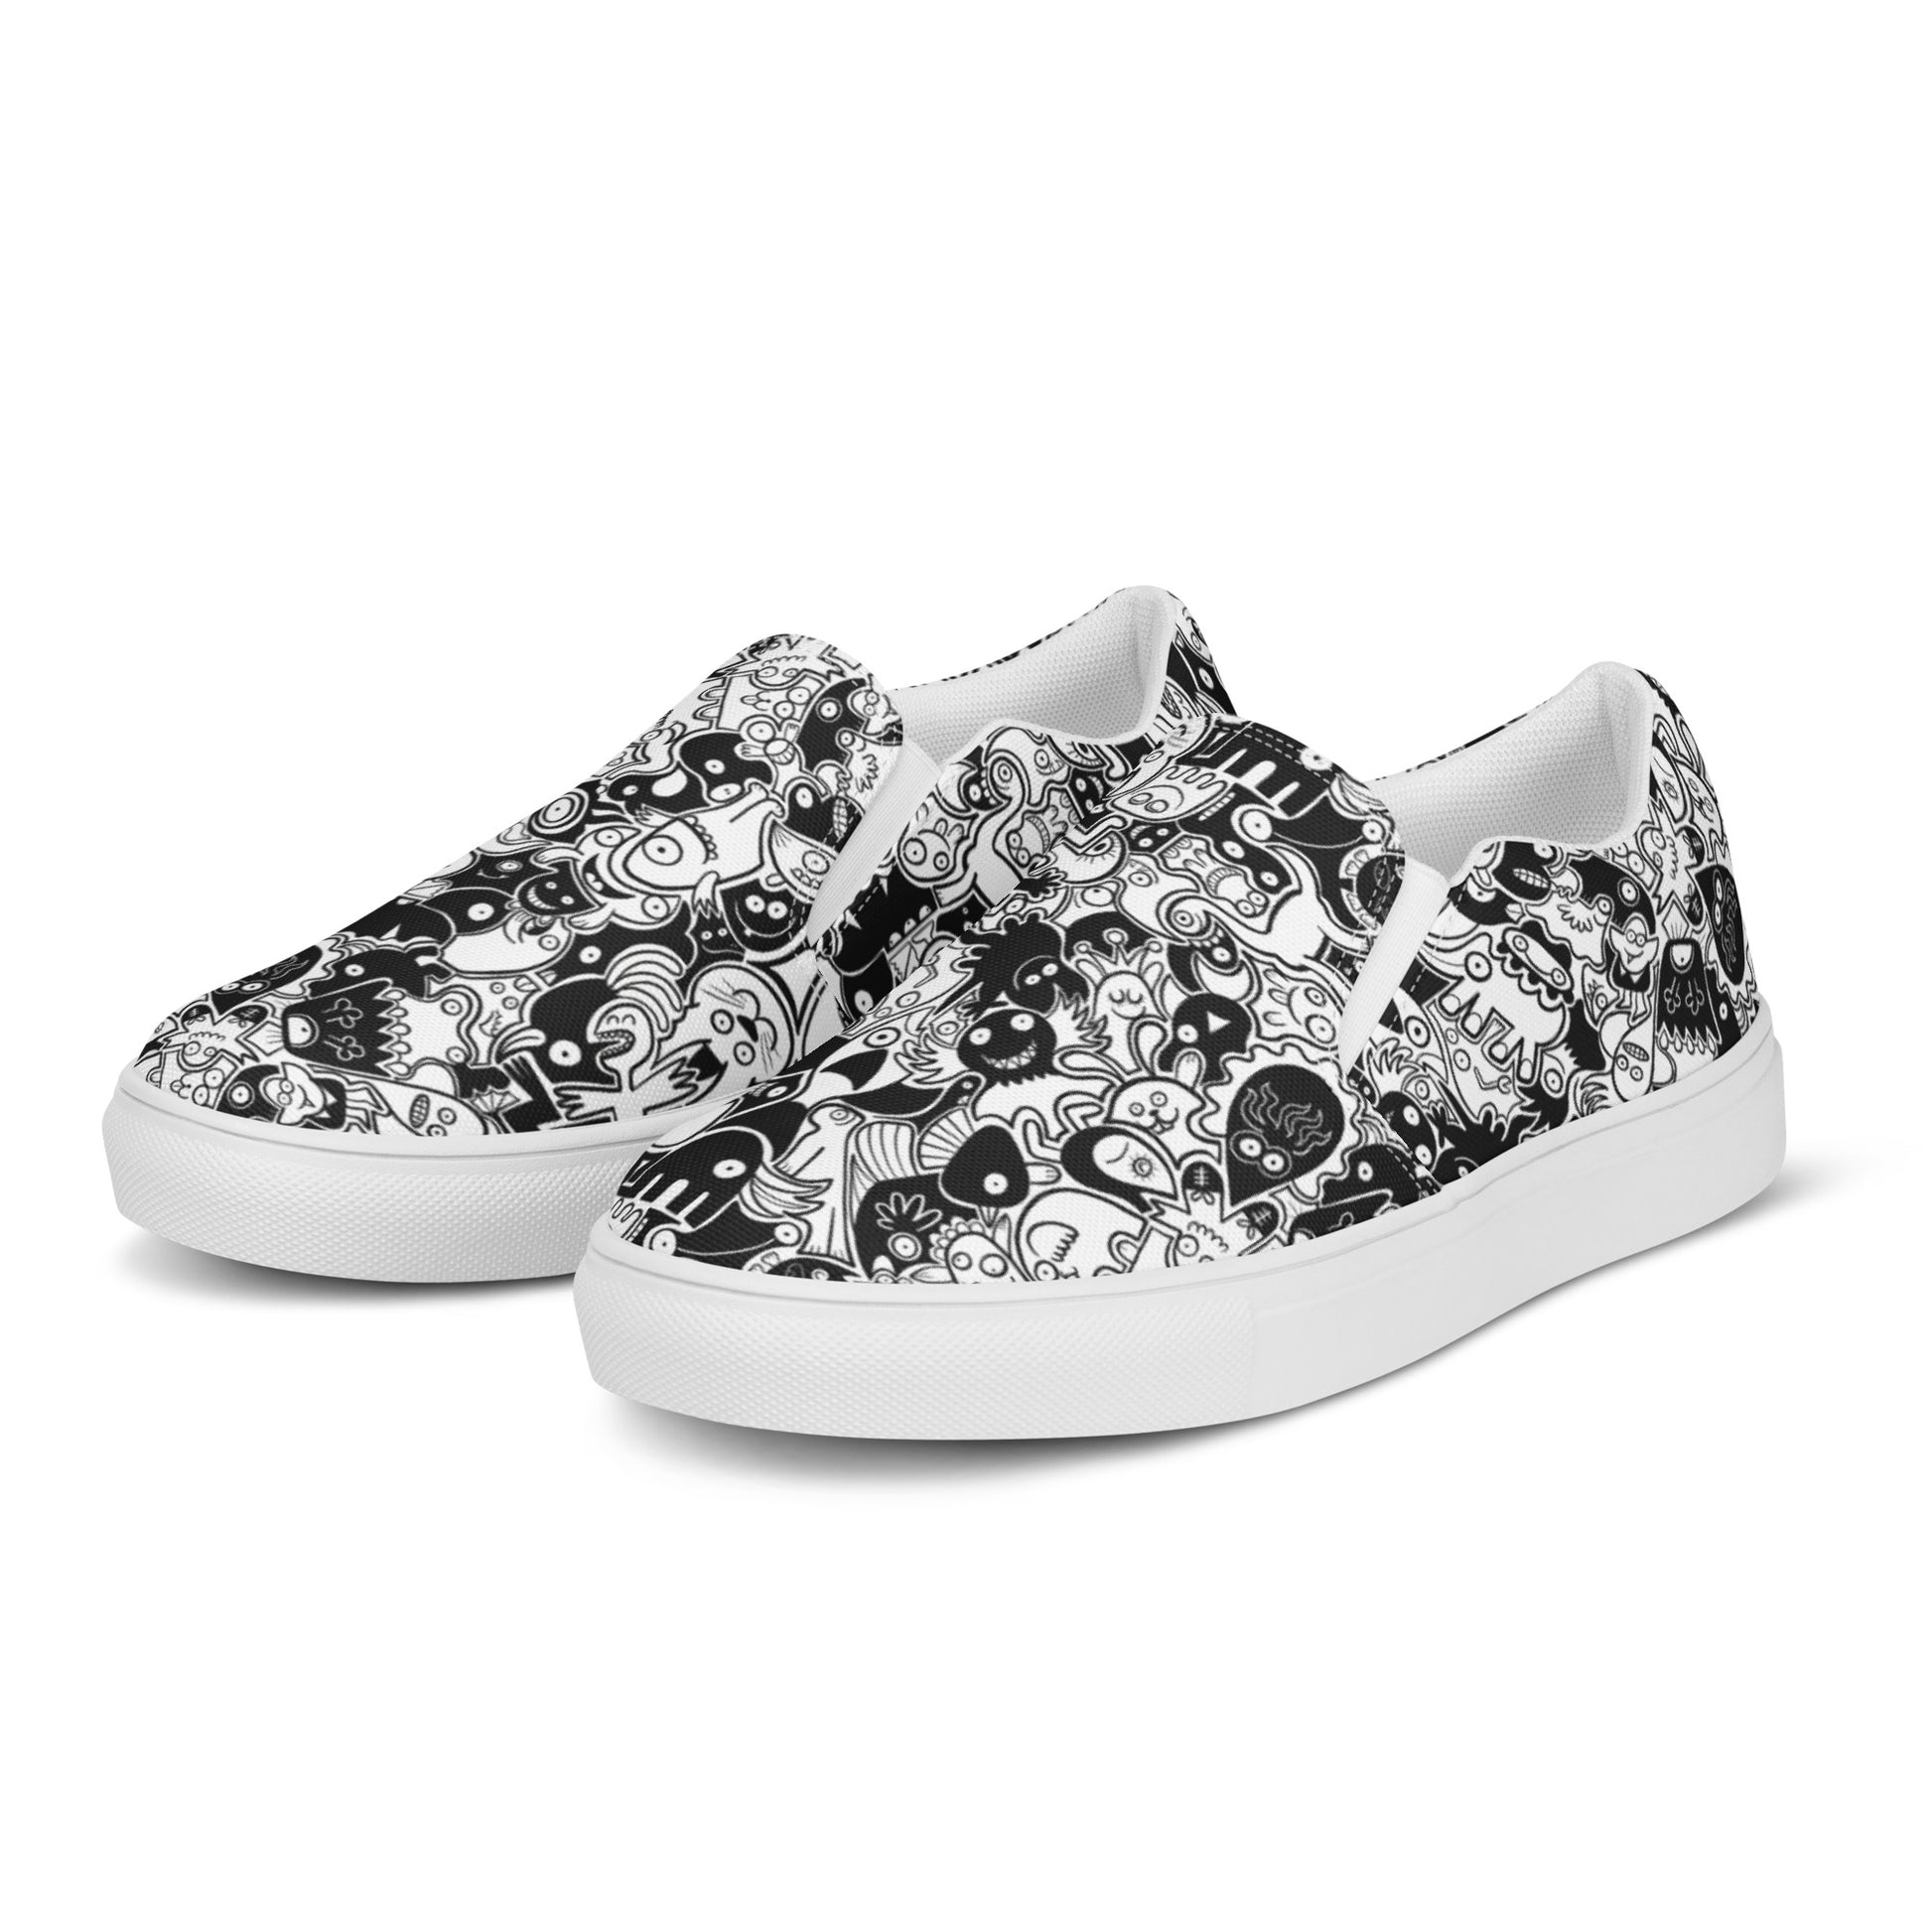 Joyful crowd of black and white doodle creatures Men’s slip-on canvas shoes. Overview